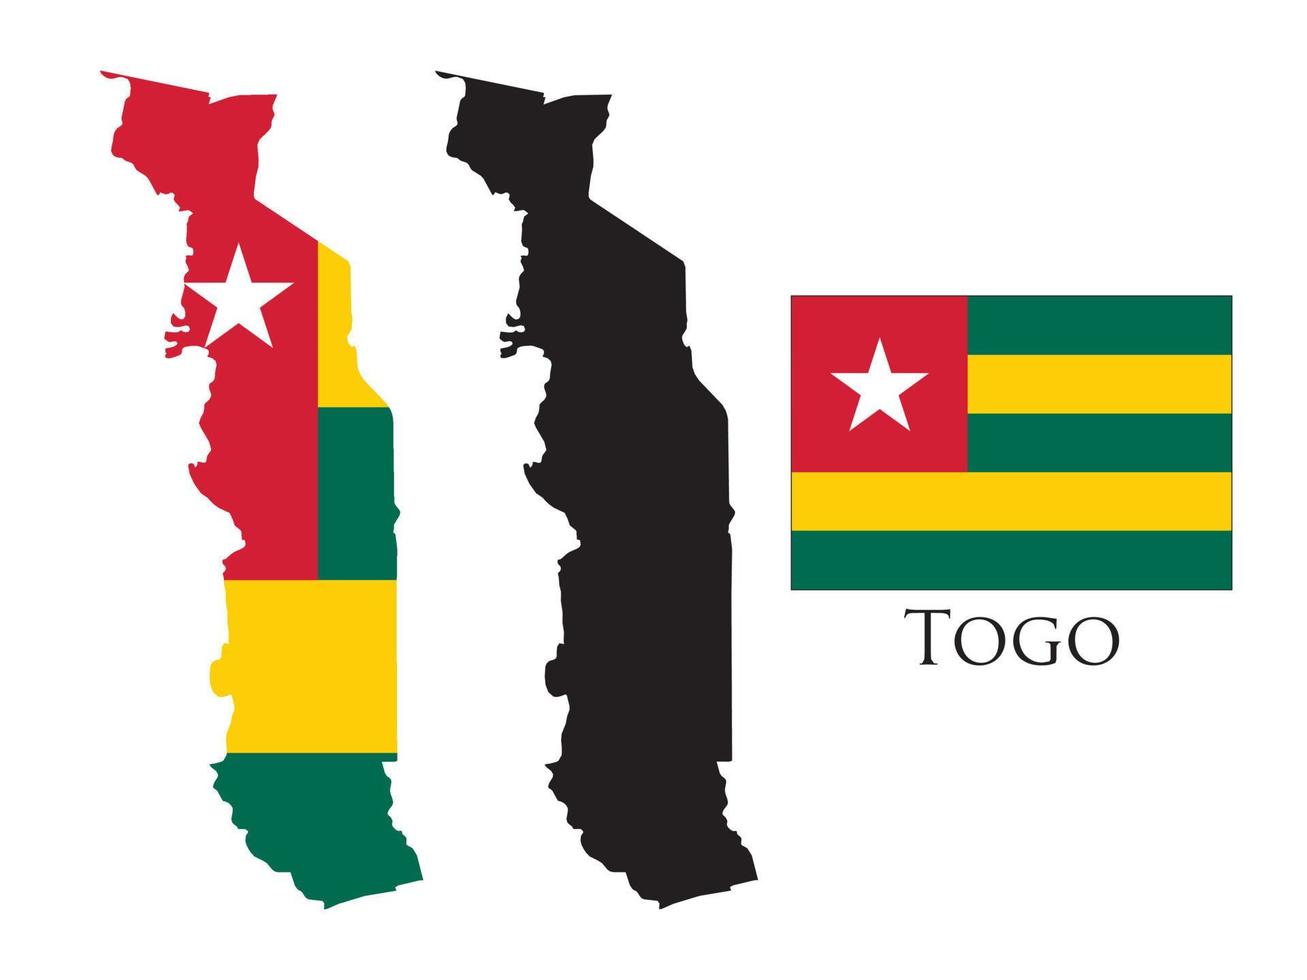 TOGO flag and map illustration vector